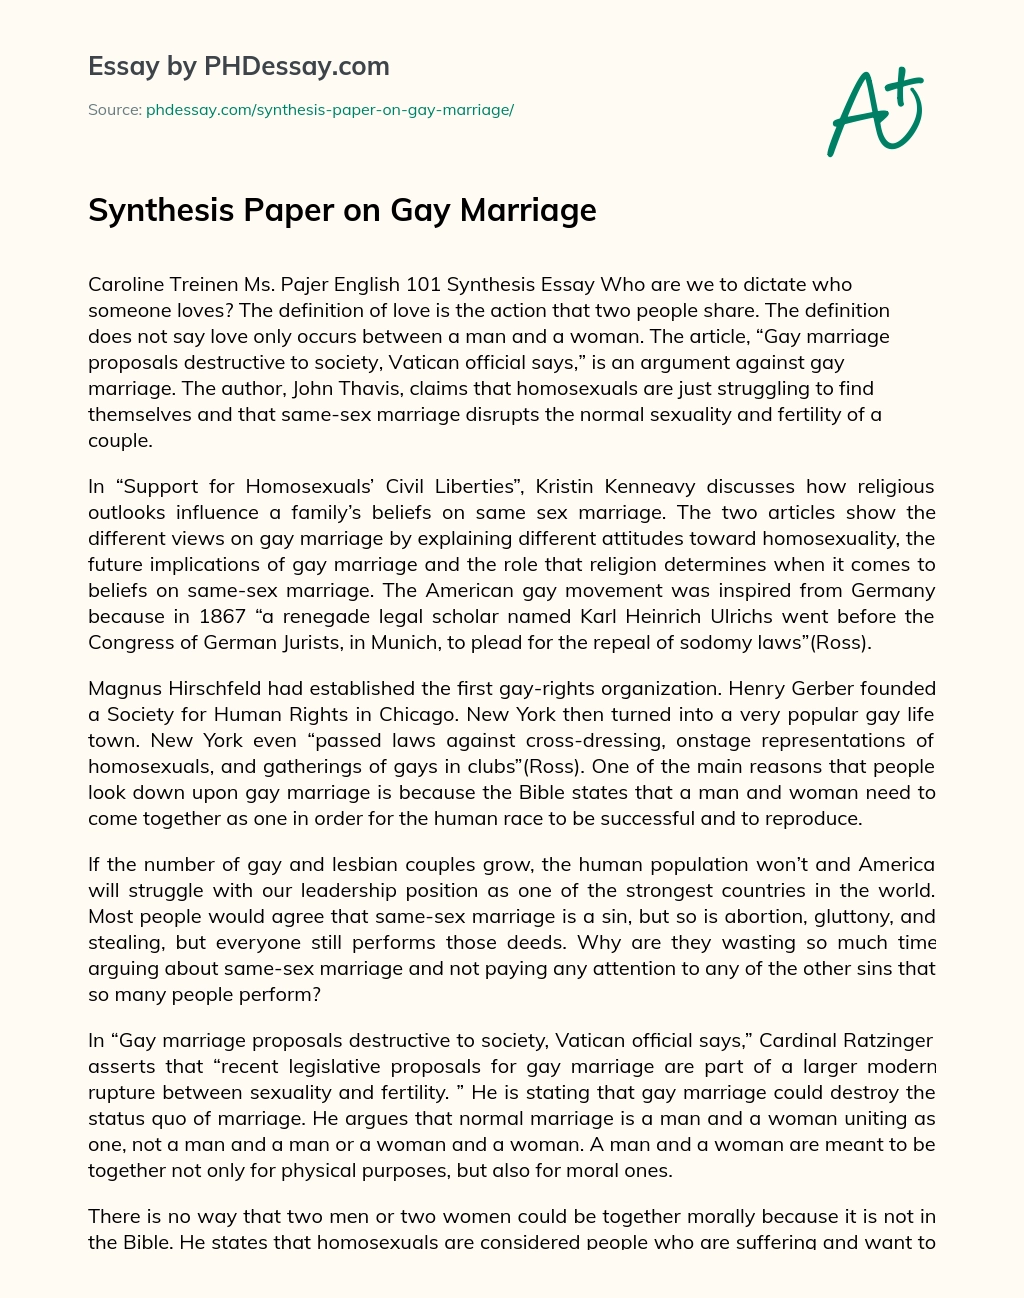 Synthesis Paper on Gay Marriage